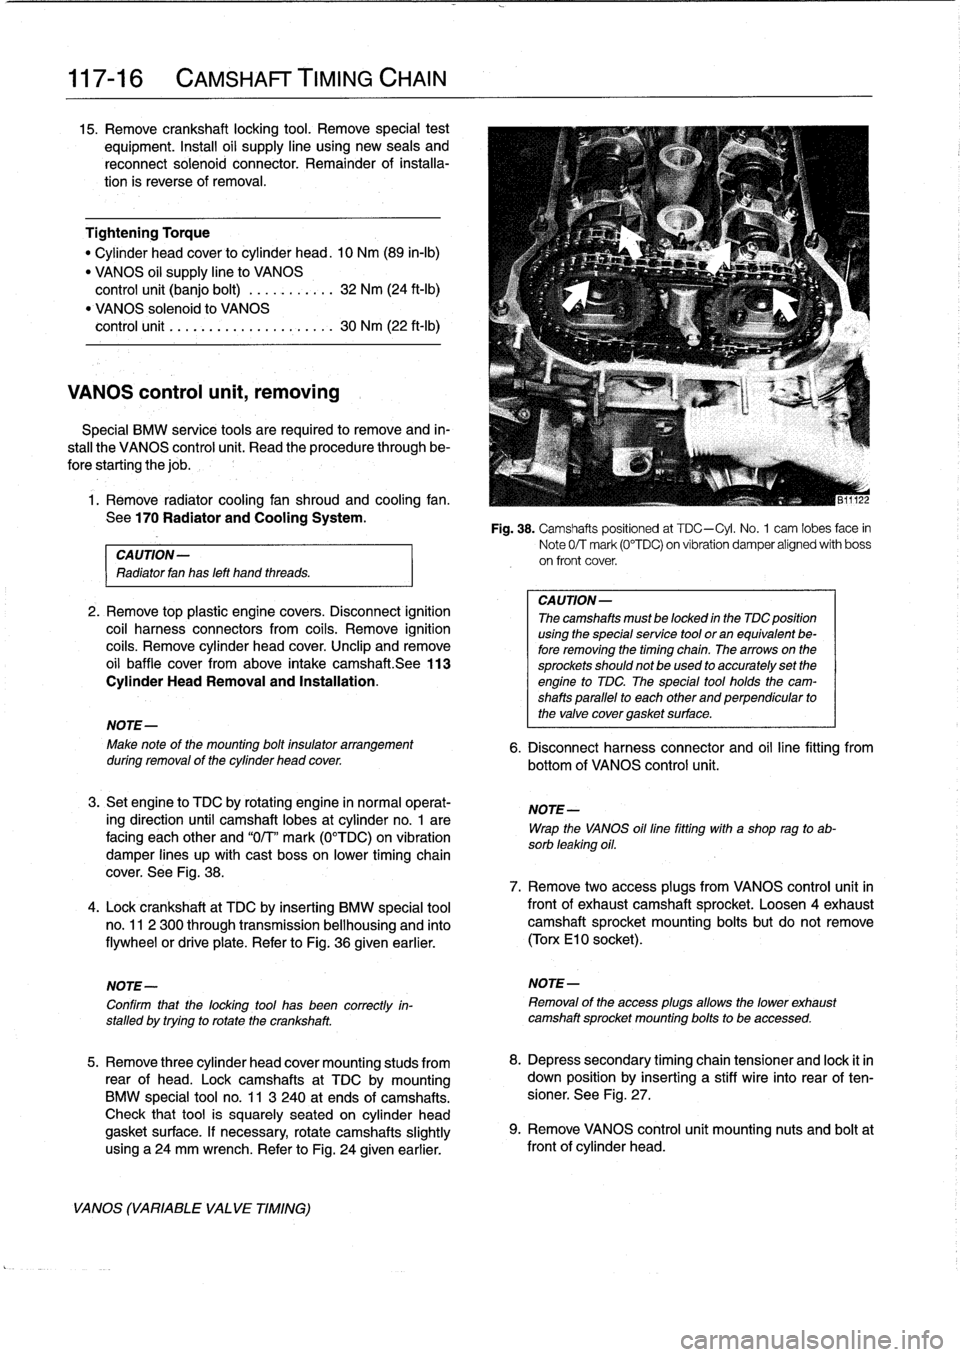 BMW M3 1993 E36 Service Manual 
117-
1
6

	

CAMSHAFT
TIMING
CHAIN

15
.
Remove
crankshaft
locking
tool
.
Remove
special
test

equipment
.
Insta¡¡
oil
supply
line
using
new
seals
and

reconnect
solenoid
connector
.
Remainder
of
i